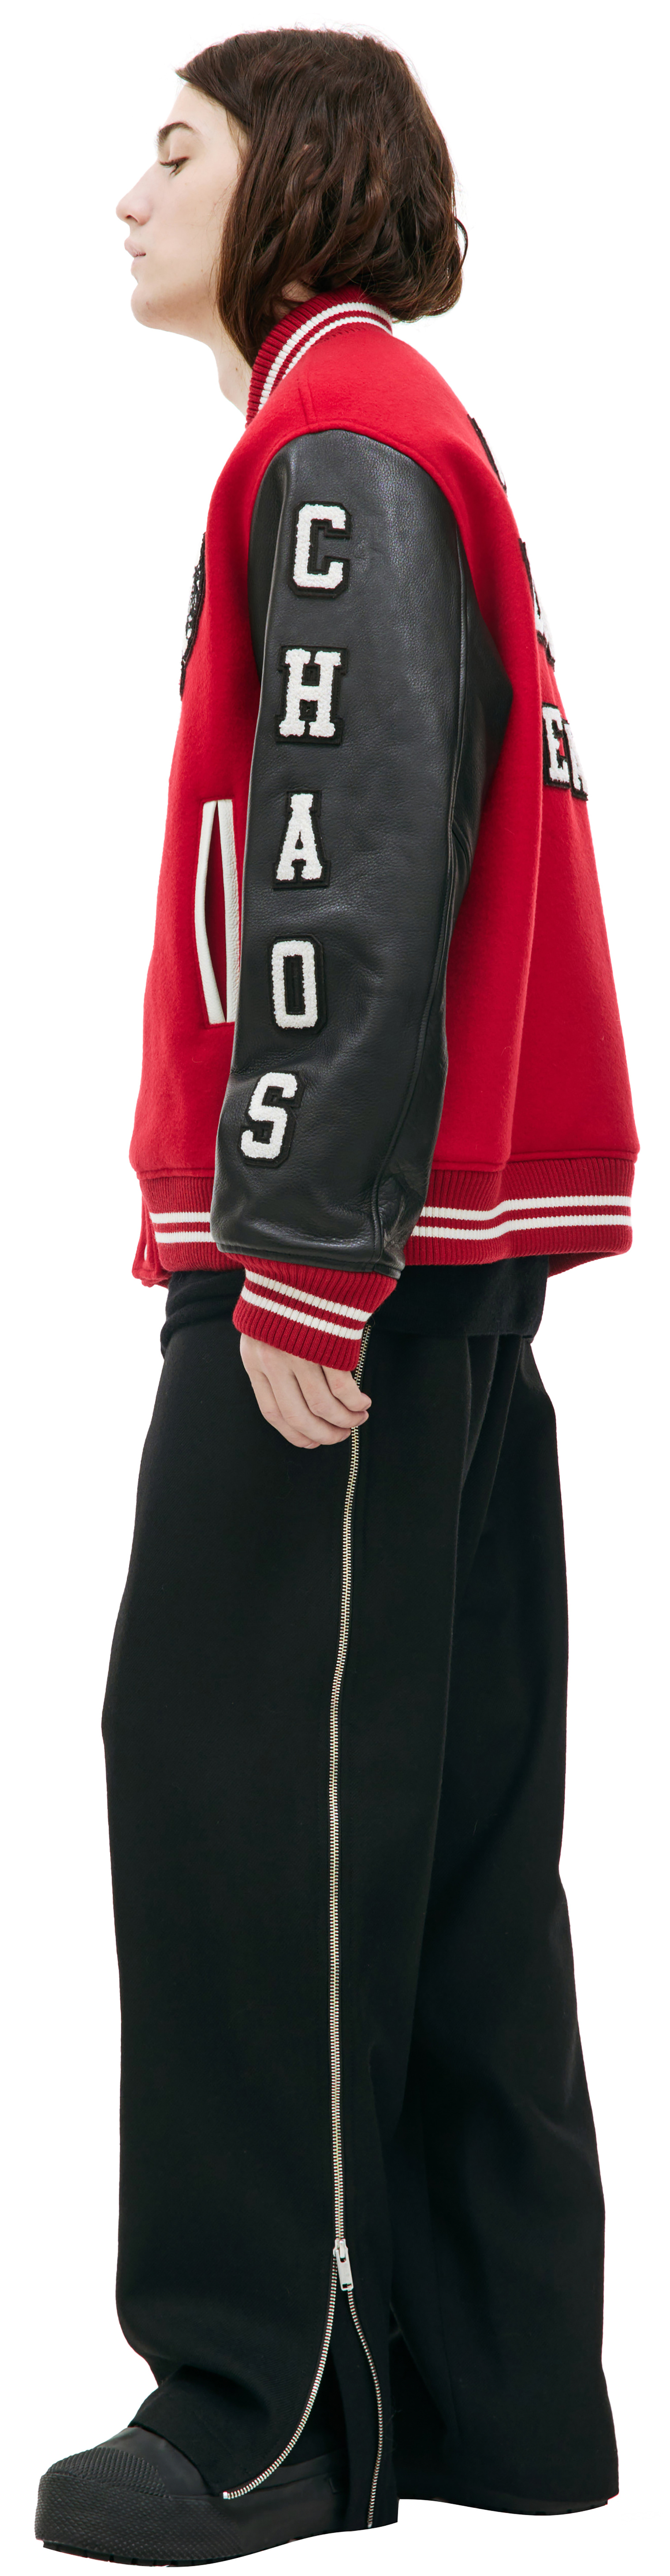 Undercover Combination bomber jacket with patches